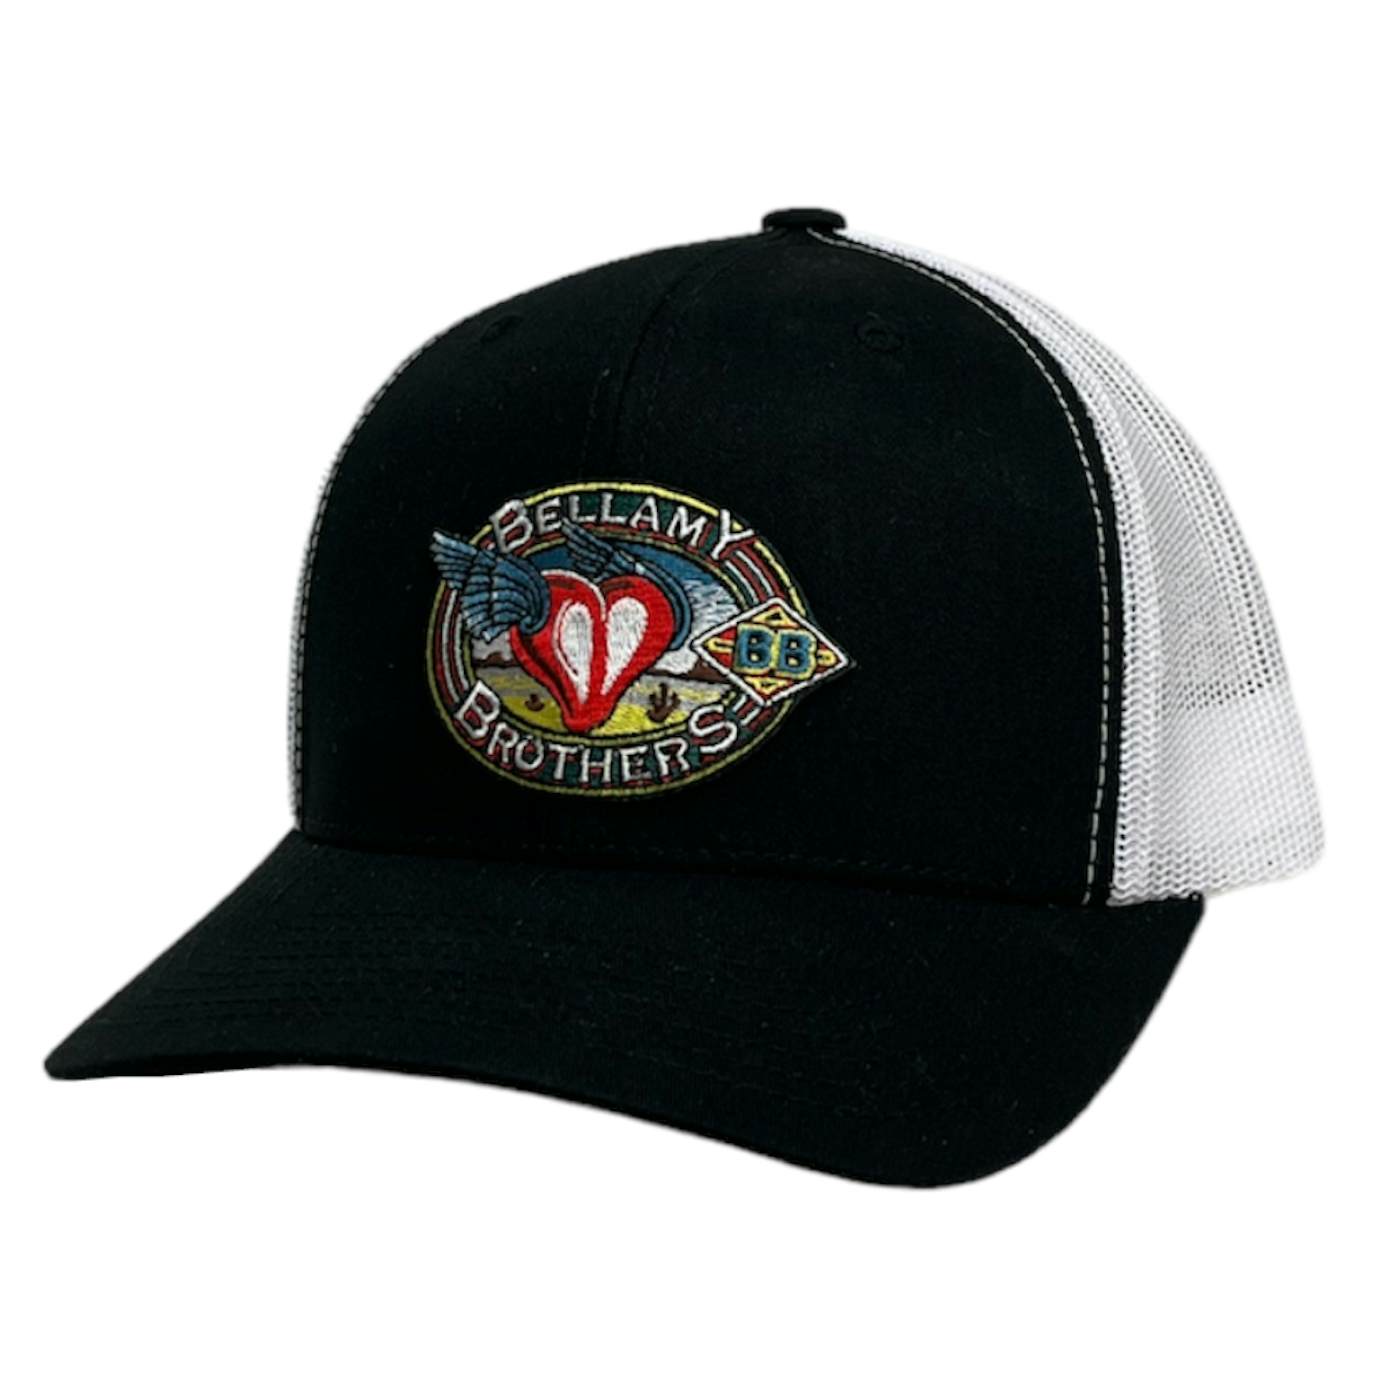 The Bellamy Brothers Bellamy Brother Black and White Logo Ballcap